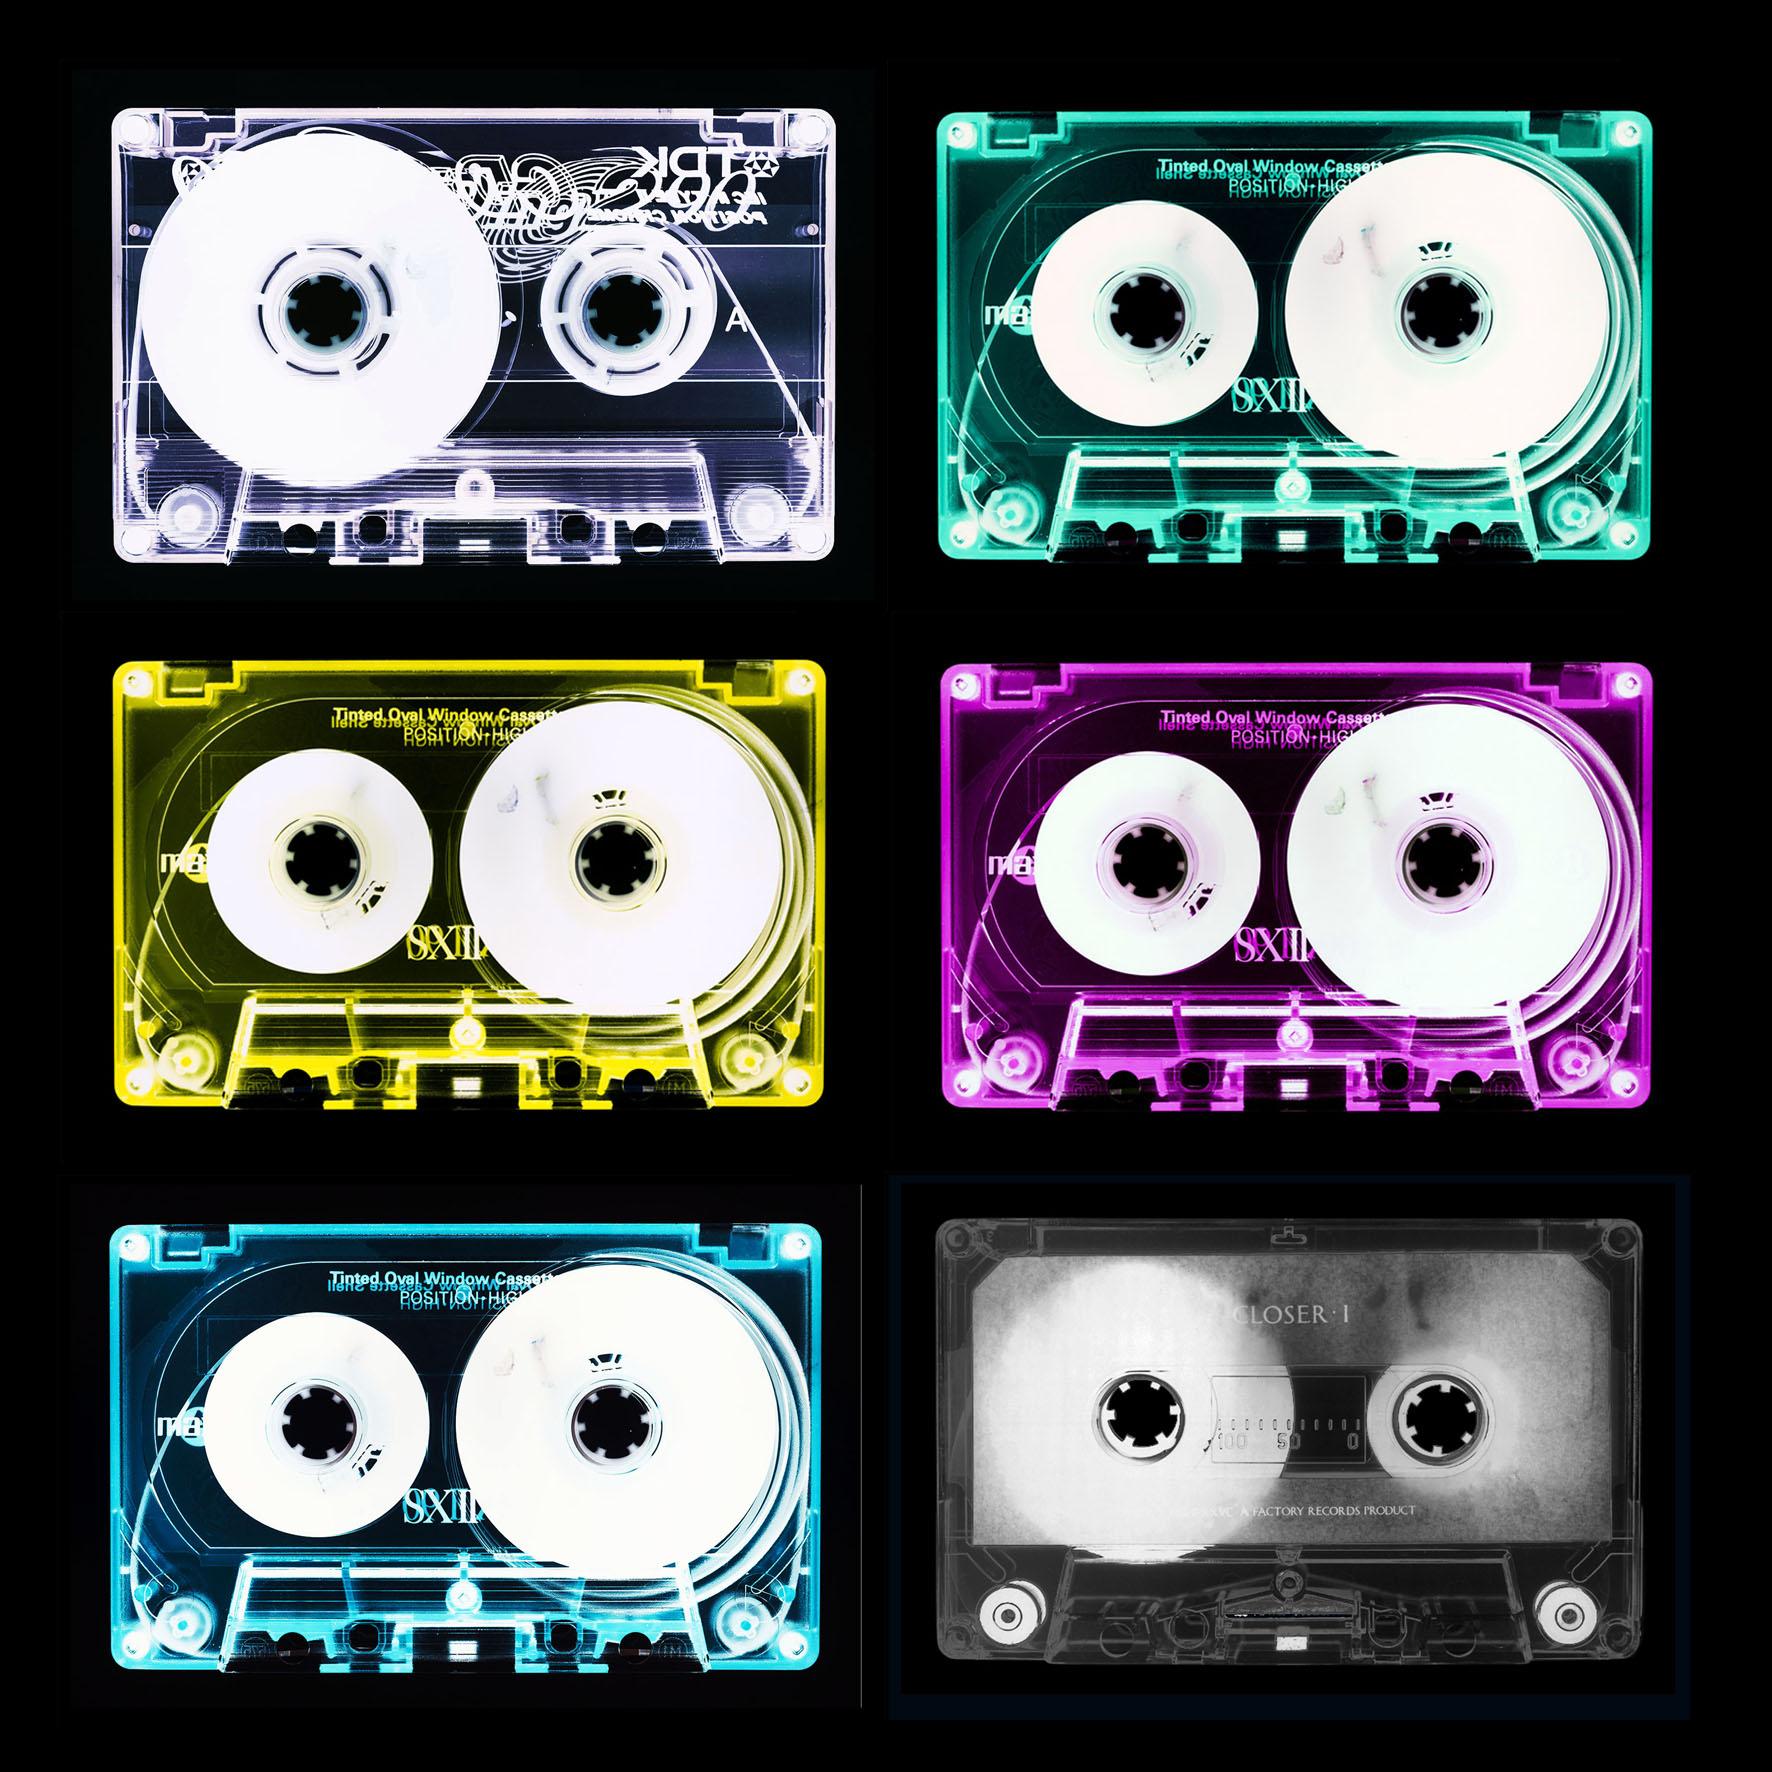 Heidler & Heeps Print - Tape Collection - Contemporary Pop Art Color Photography